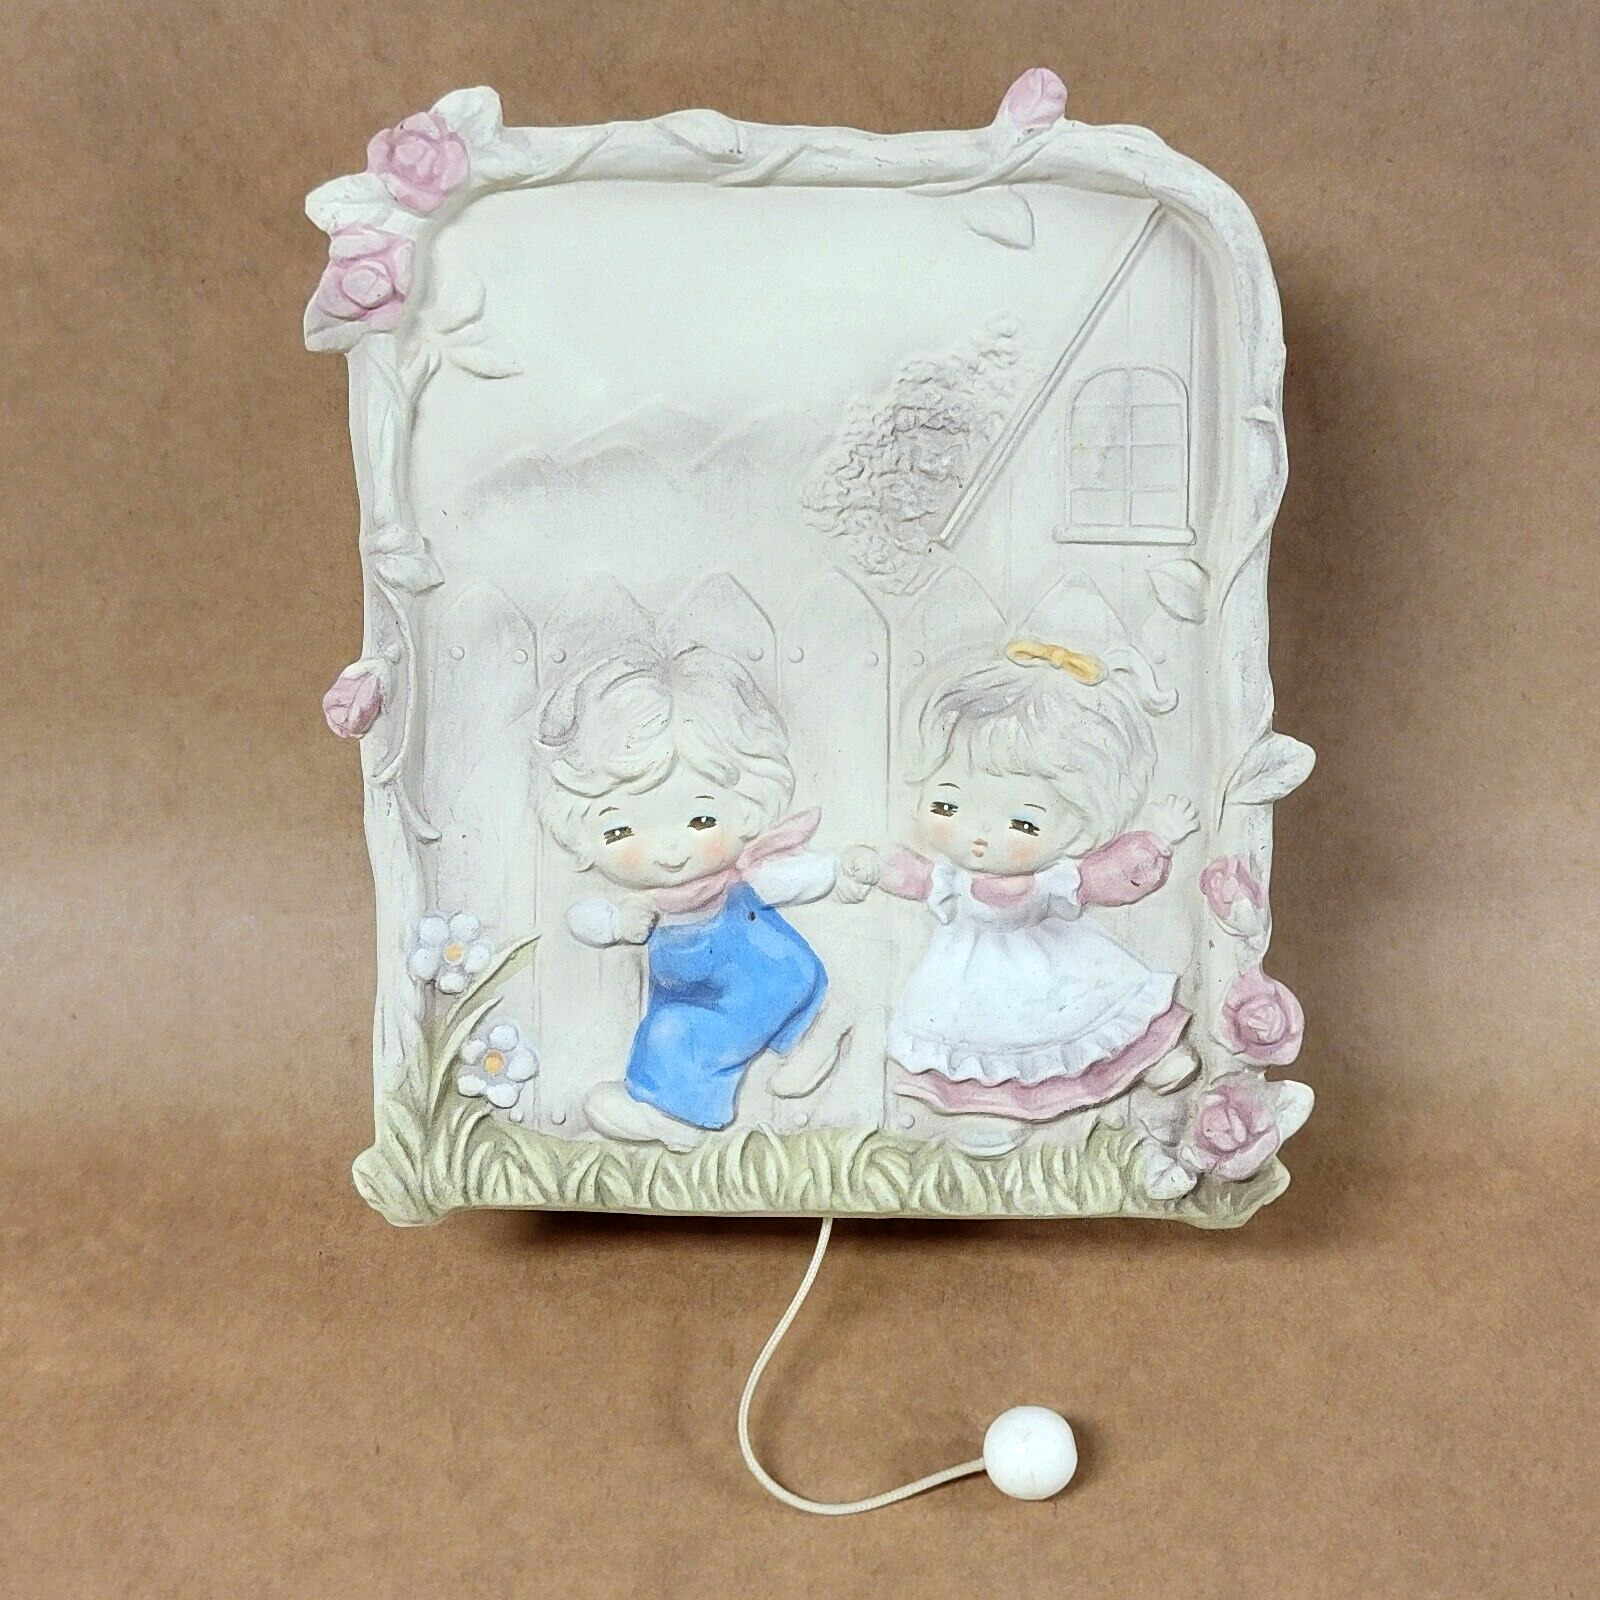 VTG Nursery Music Box Musical Wall Hanging With Pull String Ceramic 7 Inch 1970s